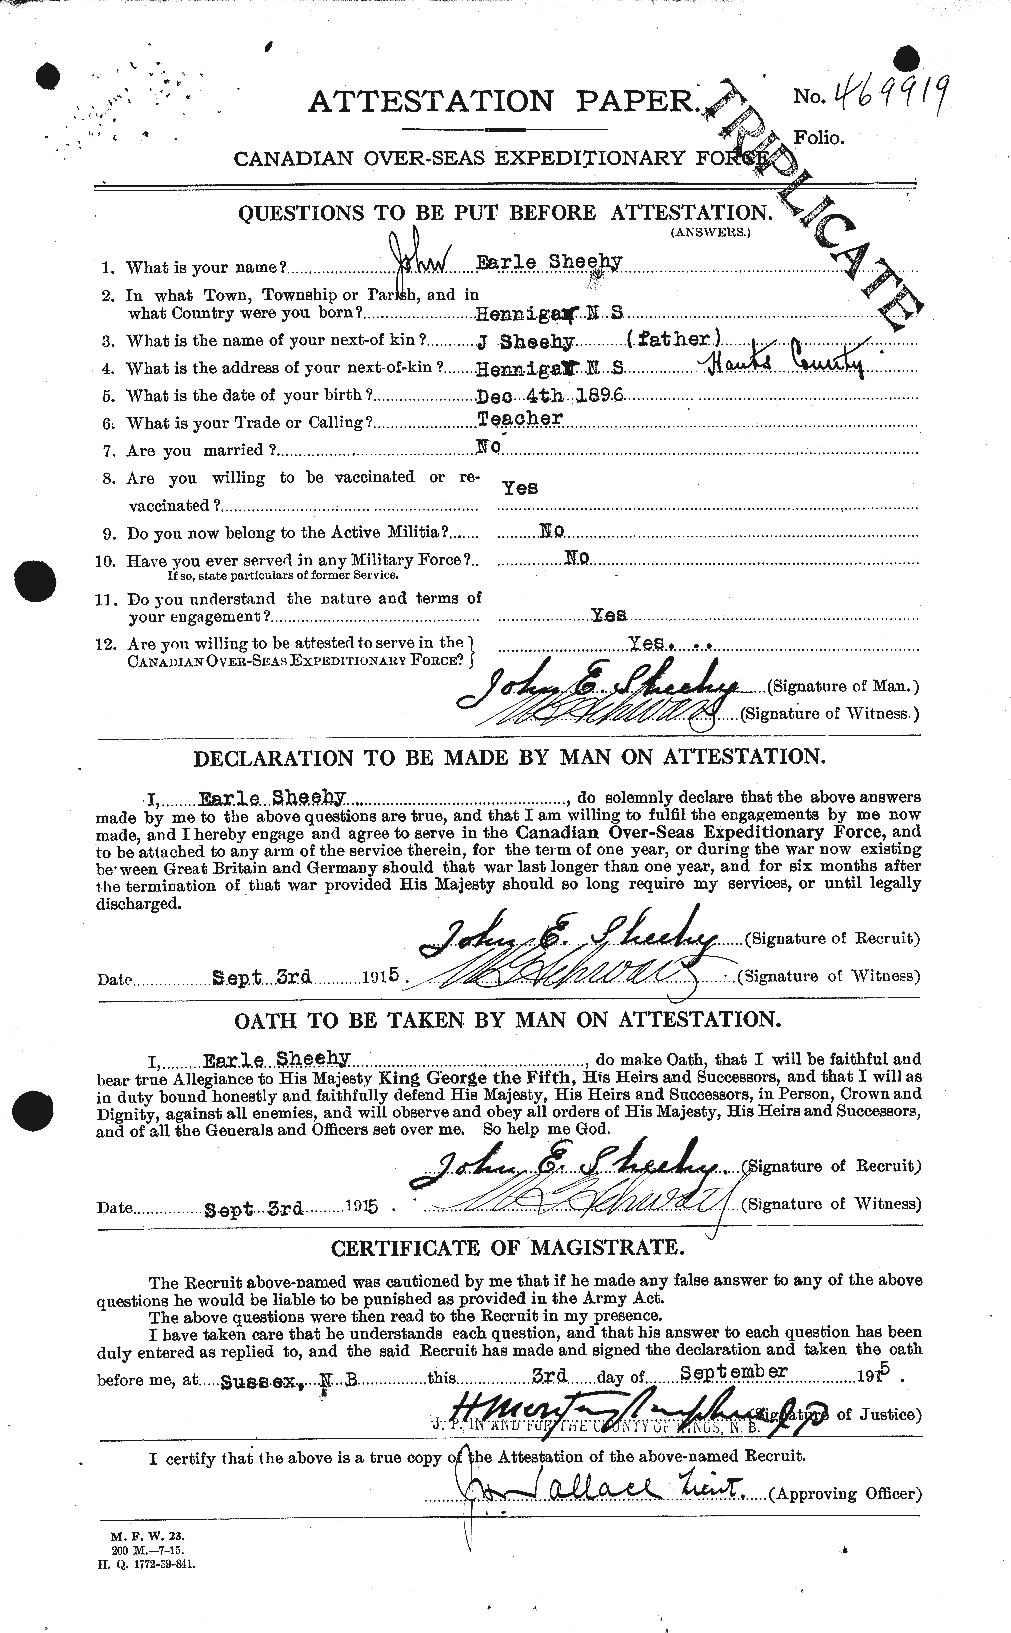 Personnel Records of the First World War - CEF 091003a